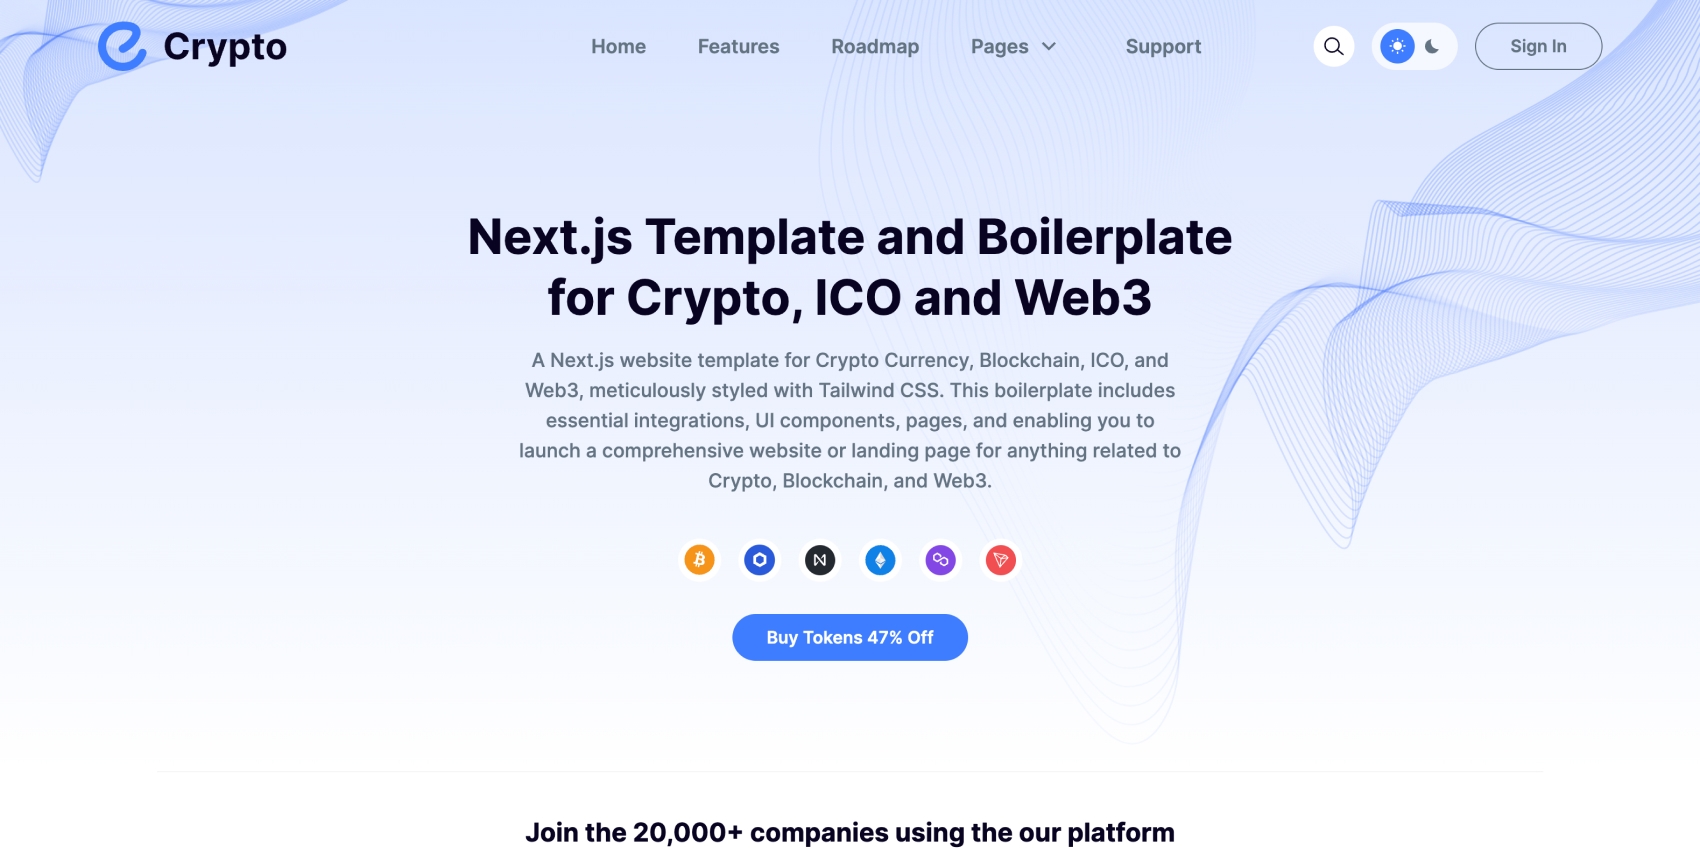 Crypto - Next.js Template for Crypto, Blockchain and Web3